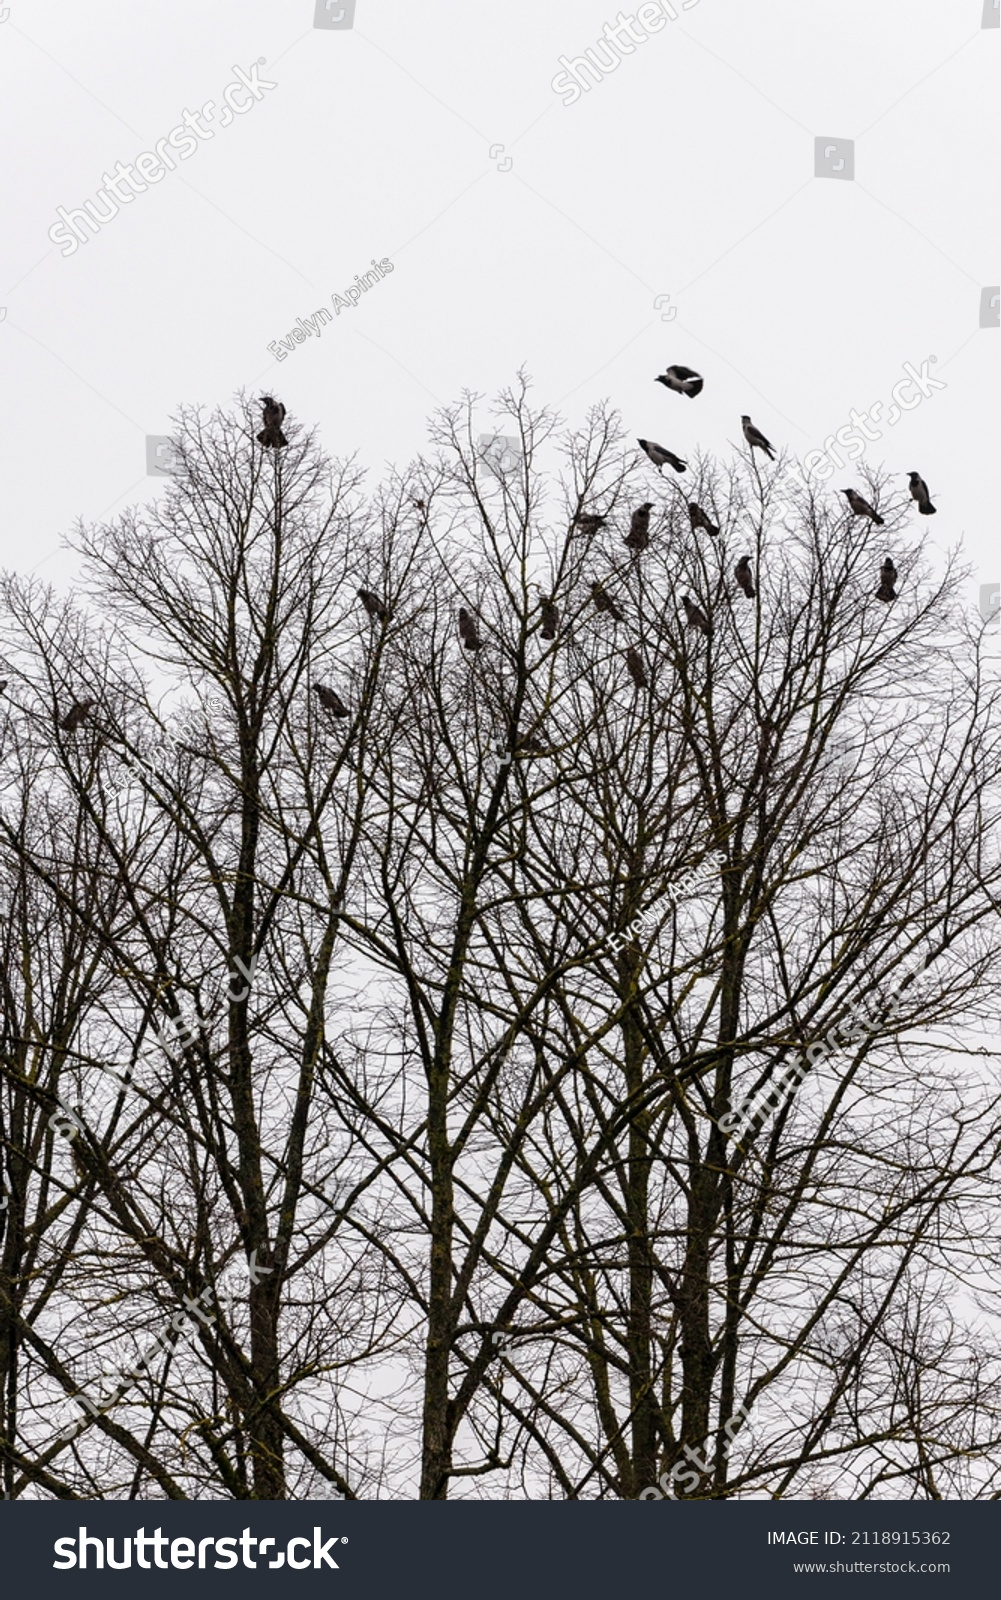 Vertical photo of bevy crows roosting in winter forest. Jackdaws perched on top of the tree branches. Group of ravens roosting in winter park at grey rainy day.   #2118915362